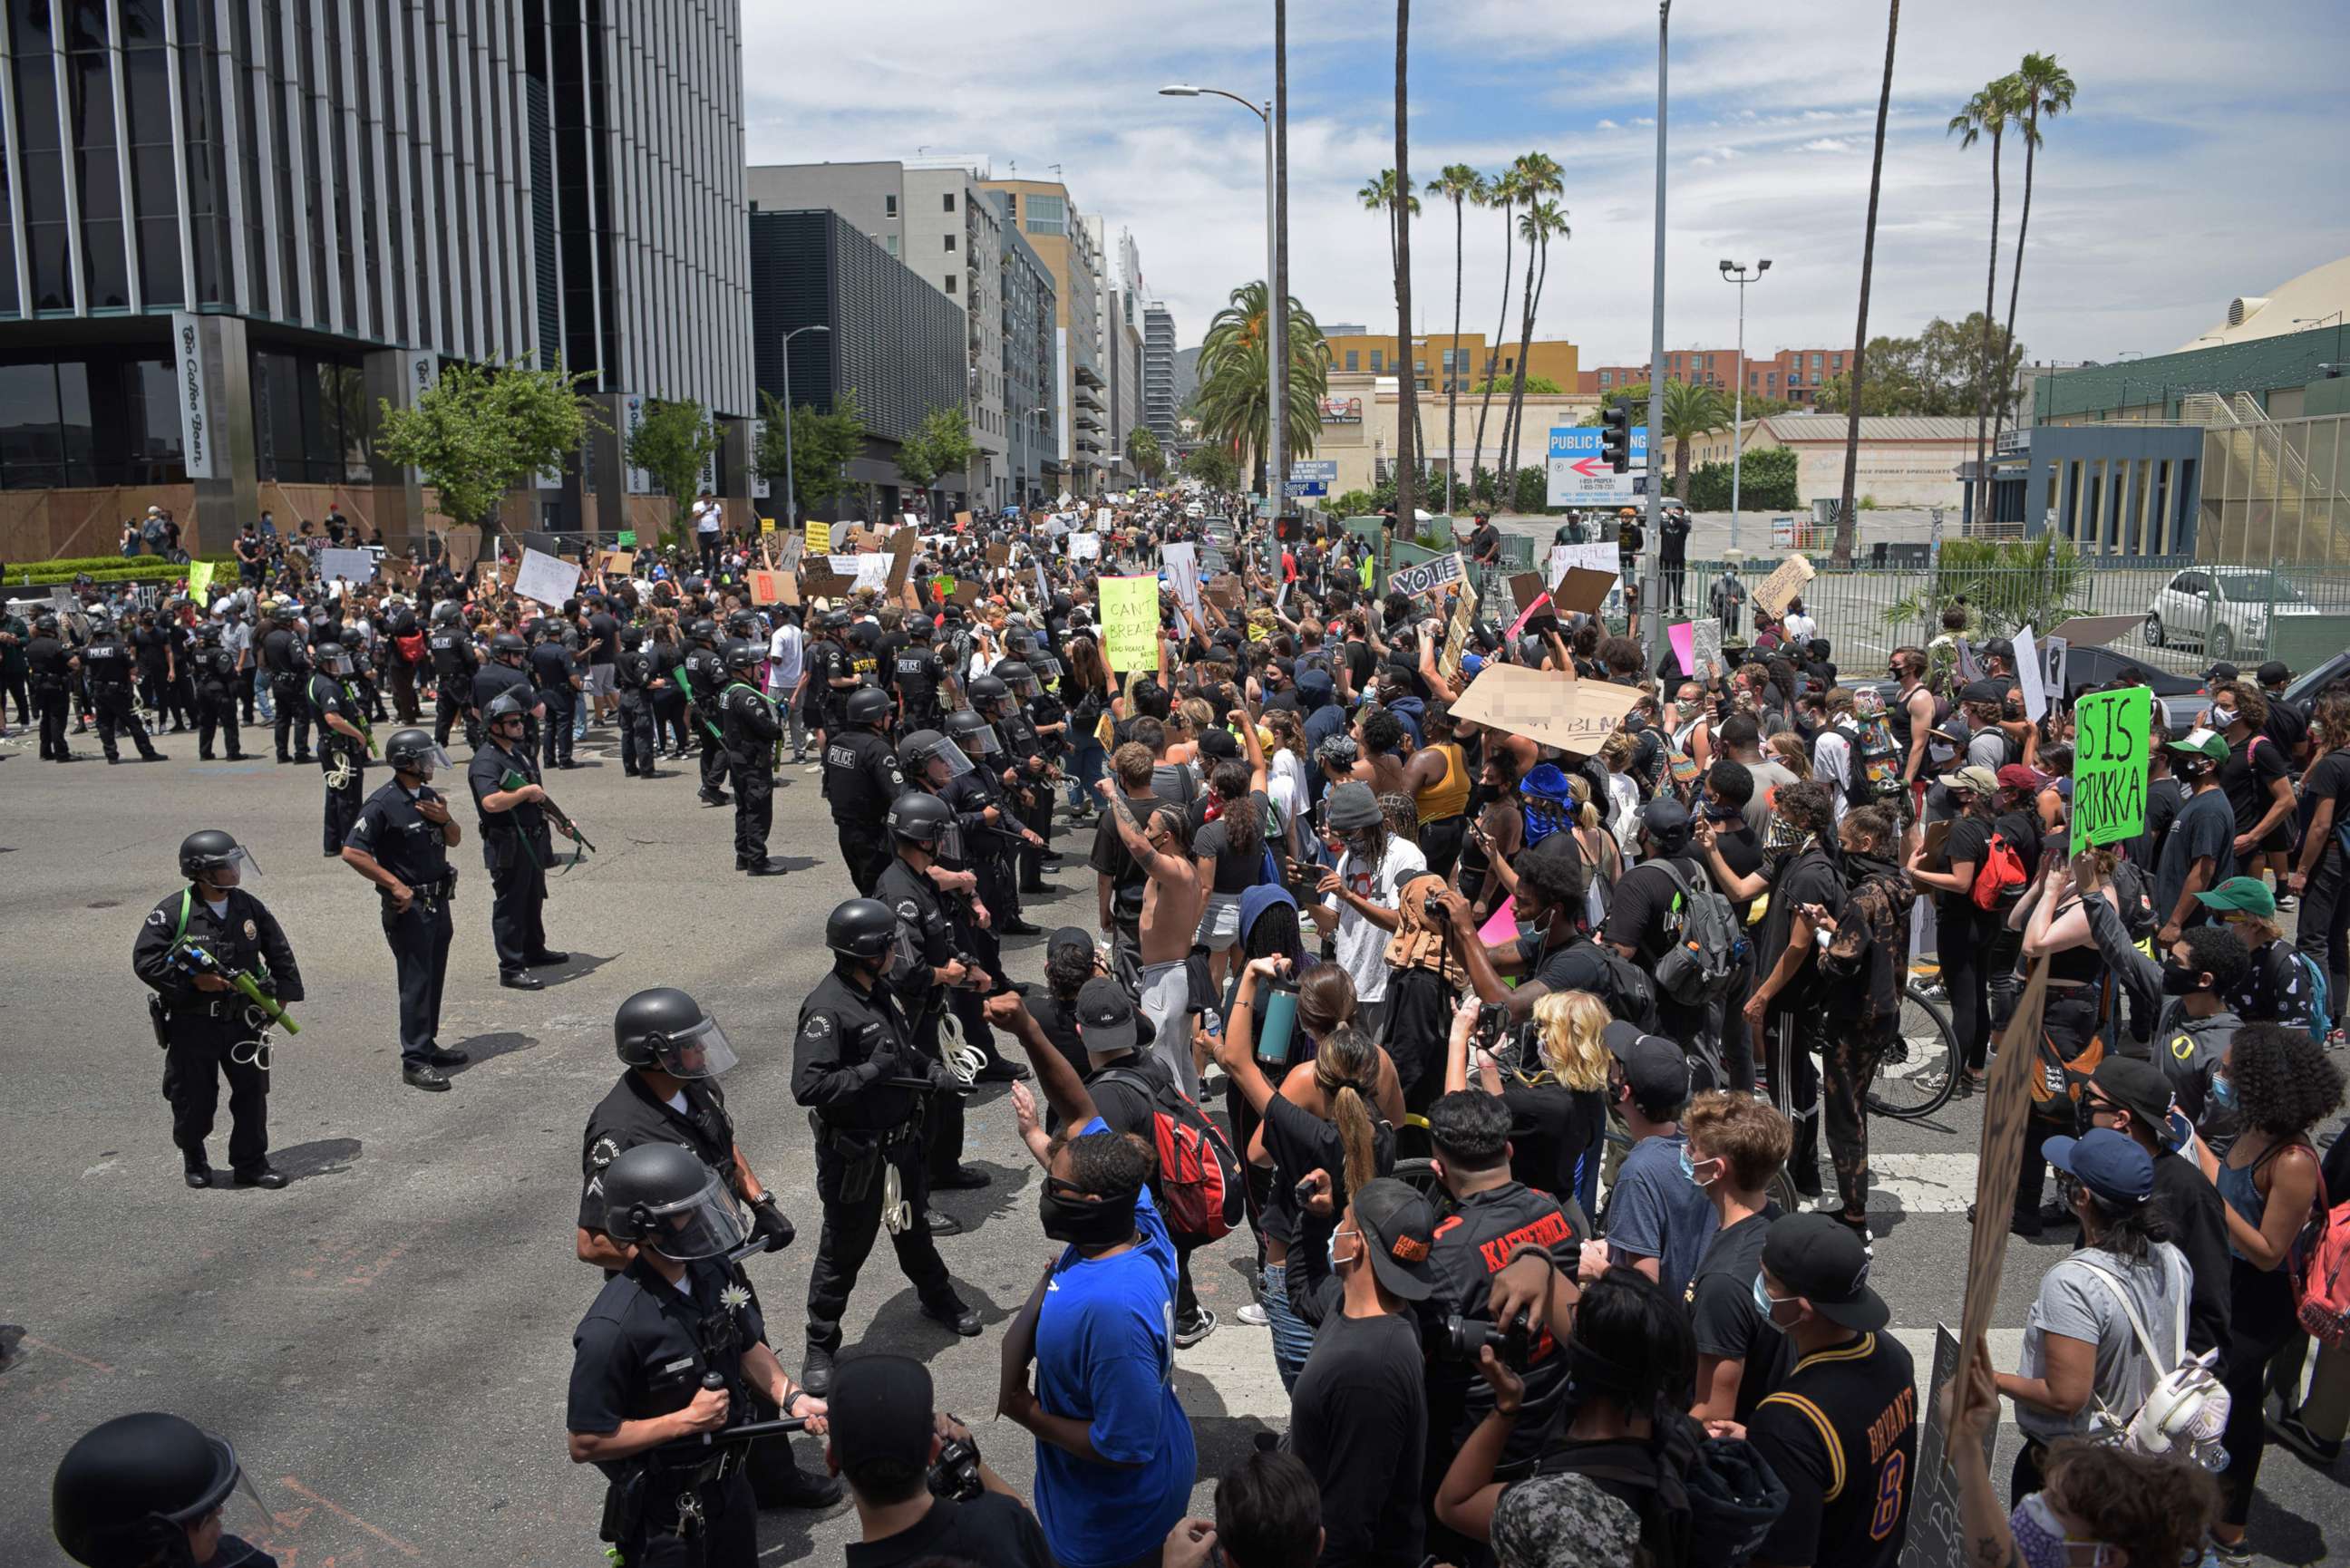 PHOTO: In this June 2, 2020, file photo, protestors gather in front of a row of LAPD officers during a demonstration over the death of George Floyd in Hollywood, Calif.